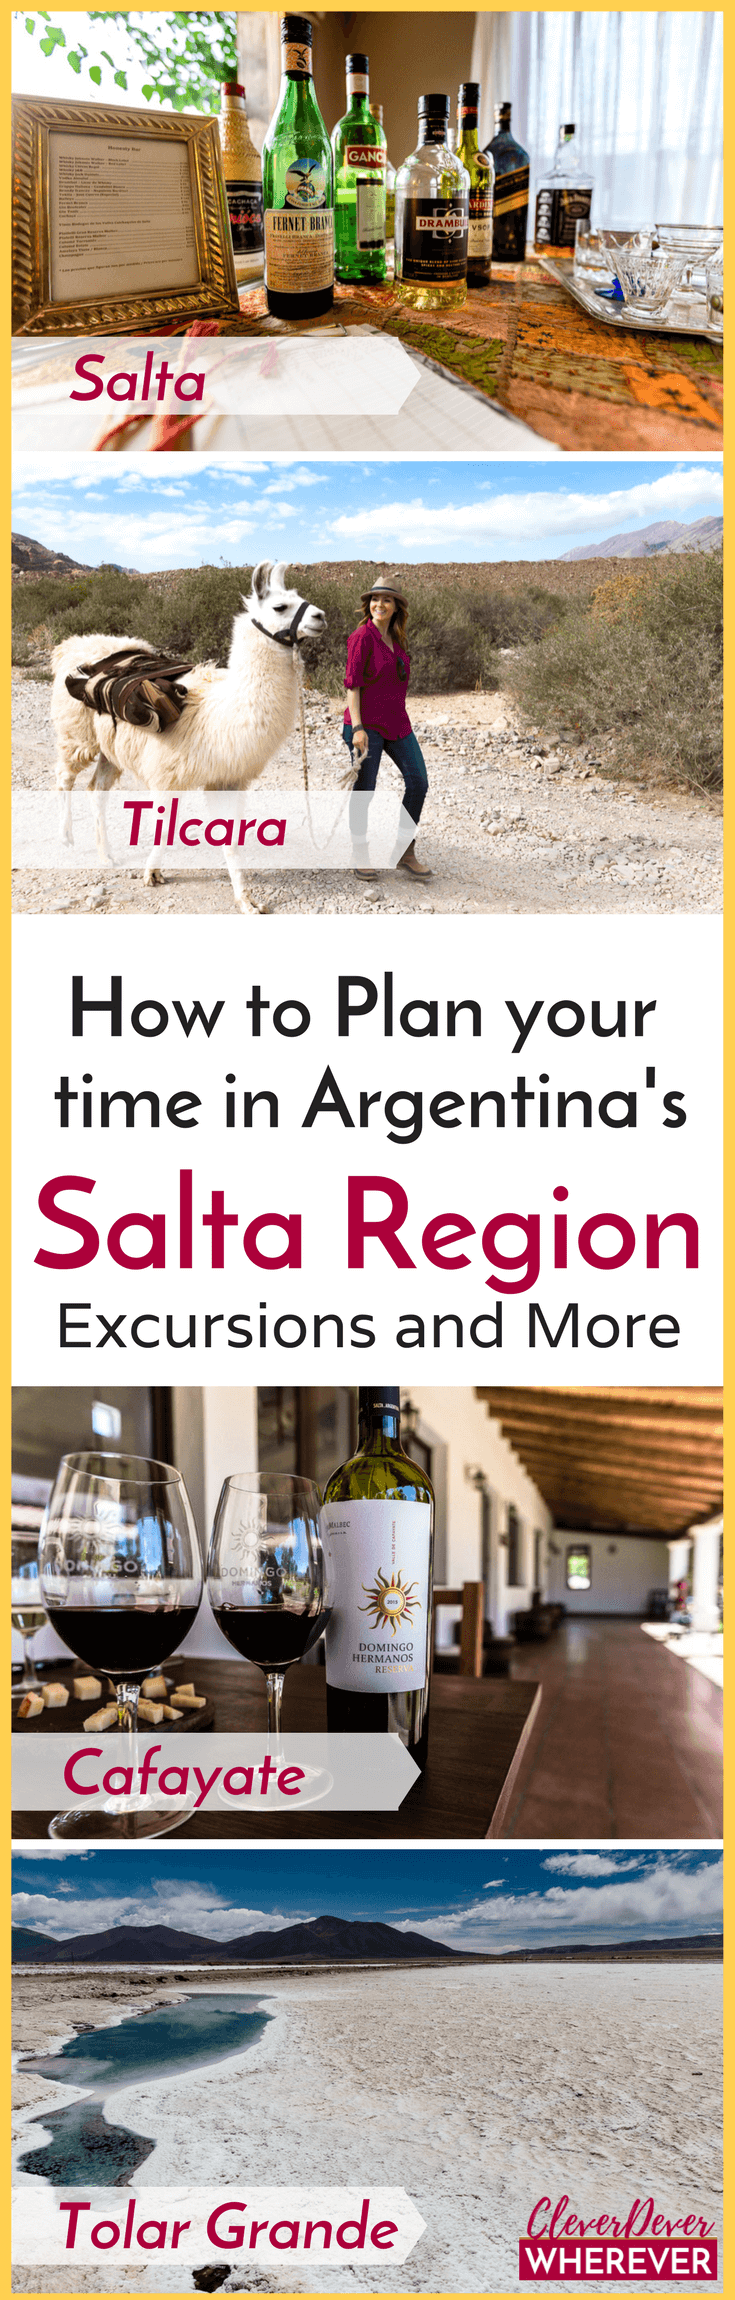 What to do in Salta Argentina? Read on for details on how to book excursions around the area.